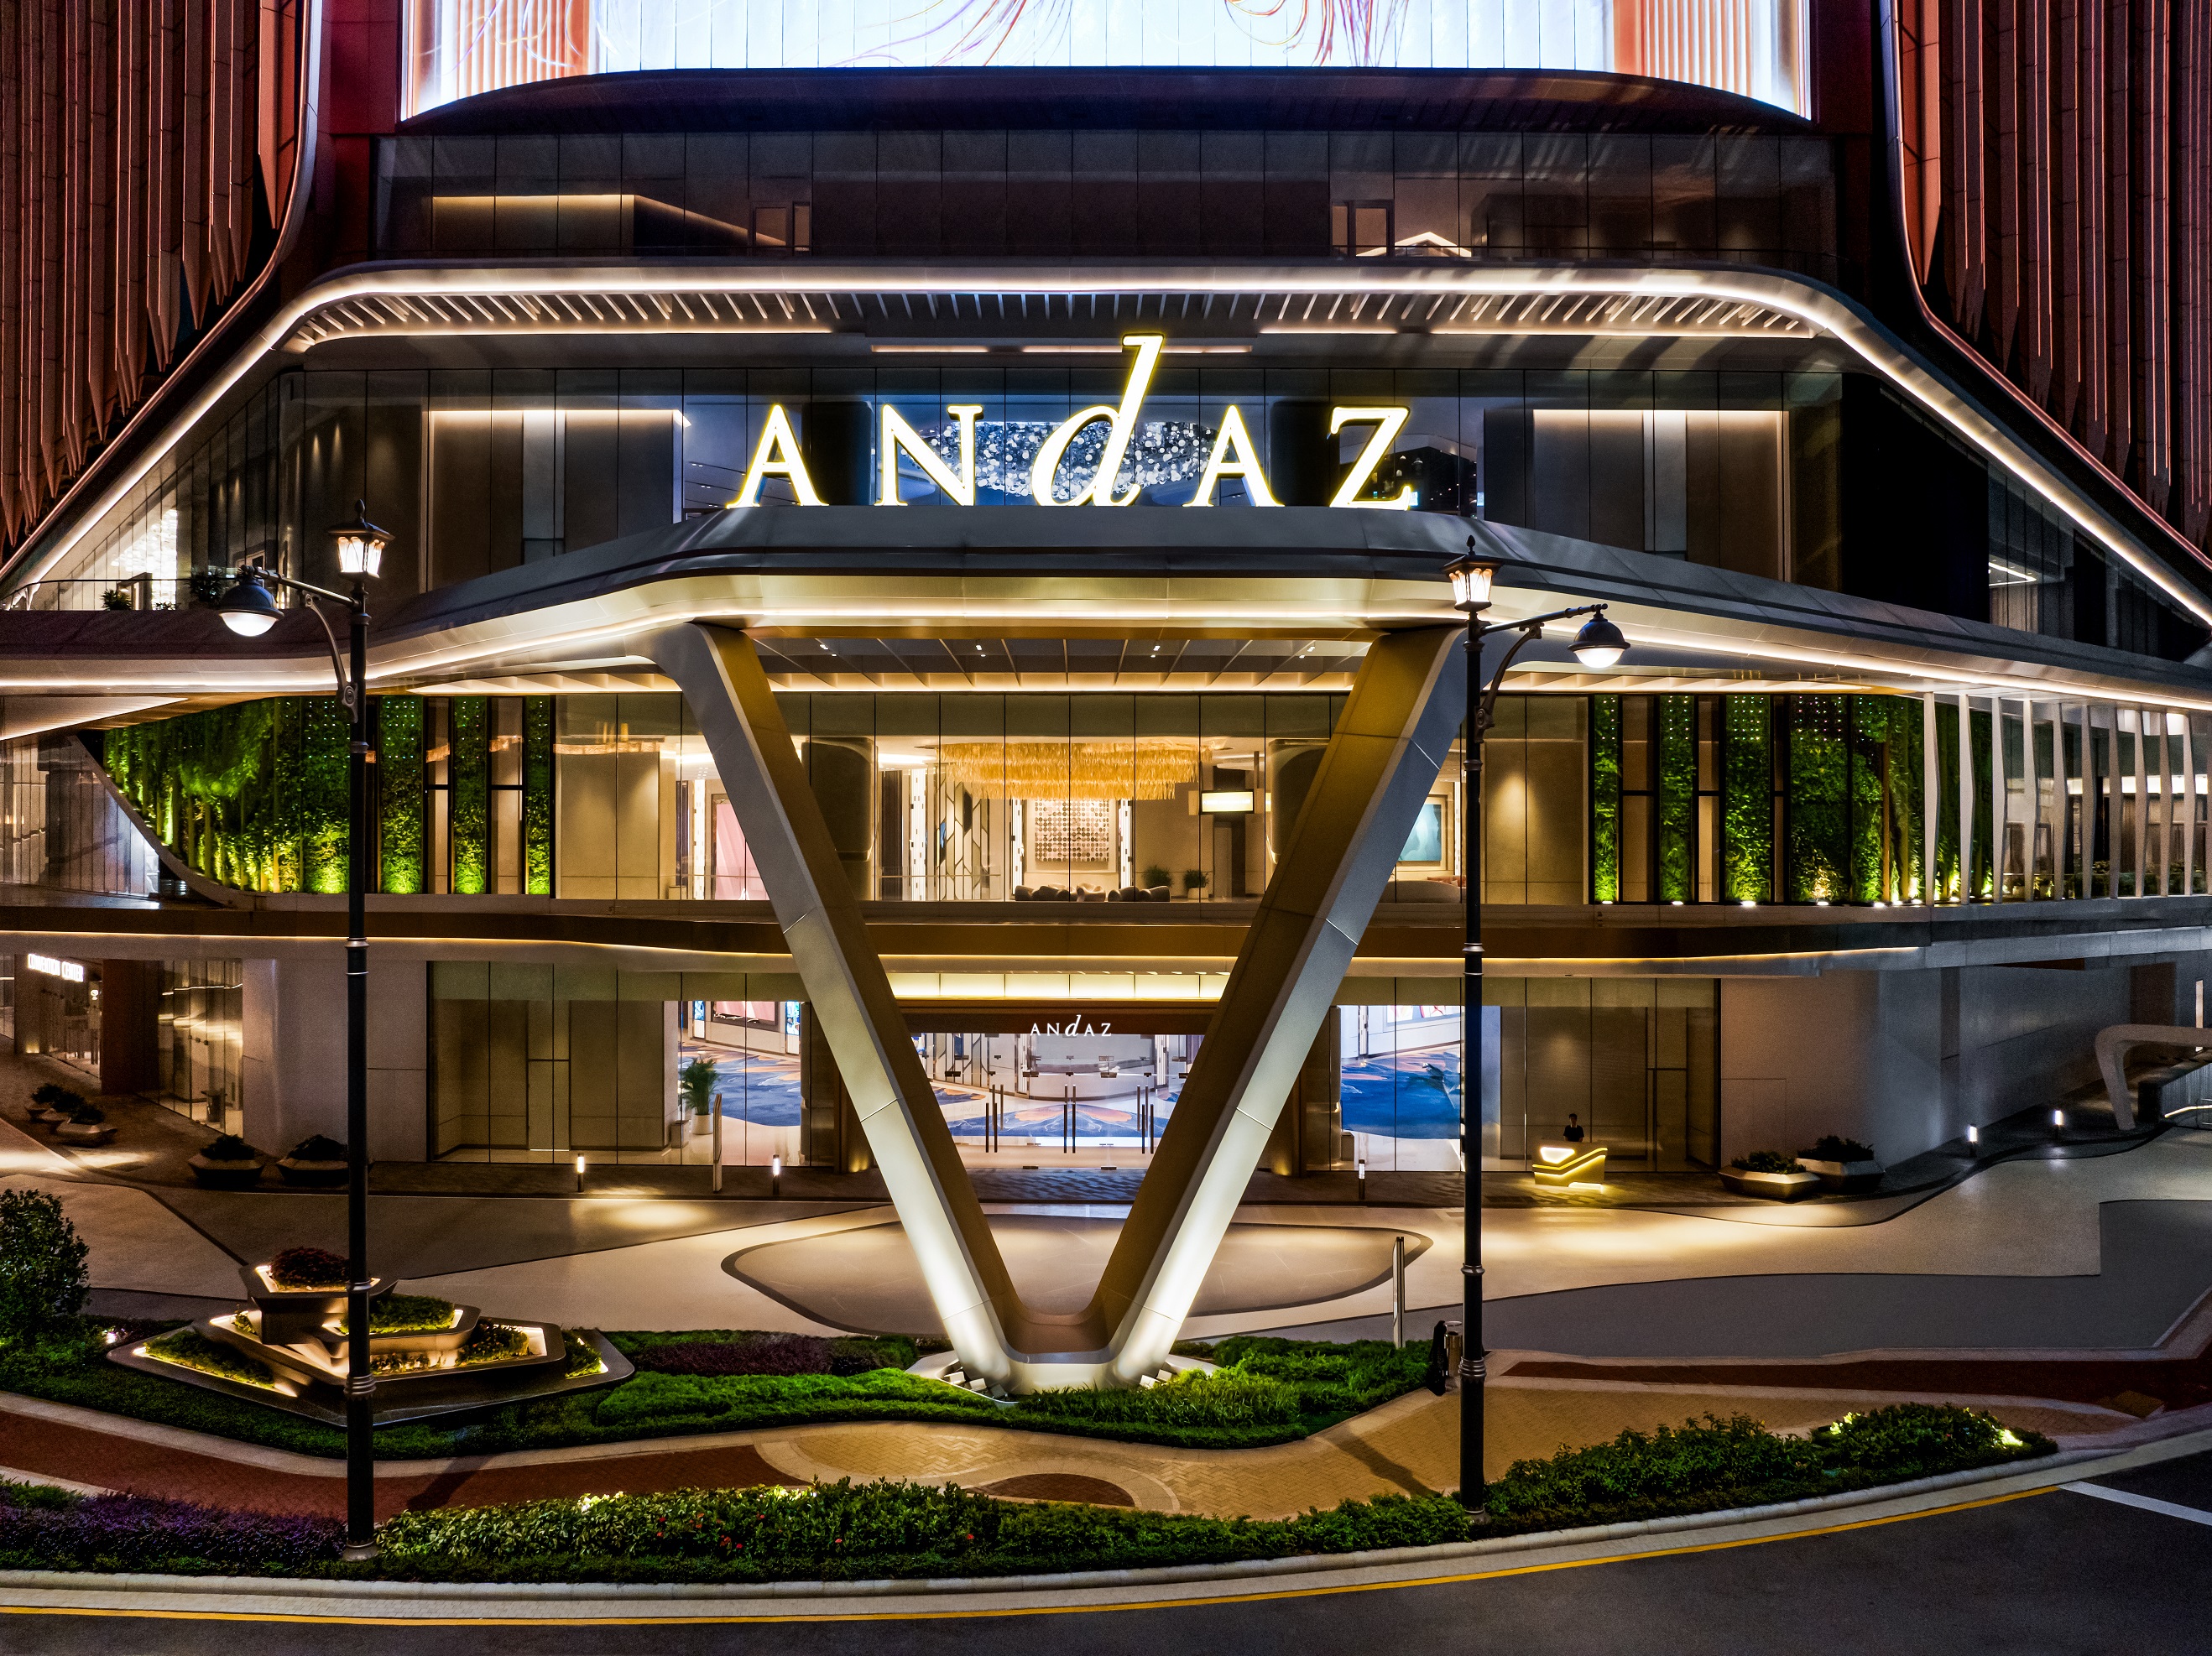 Andaz Macau named ‘Best New Hotel in China’ at the TTG China Travel Awards.